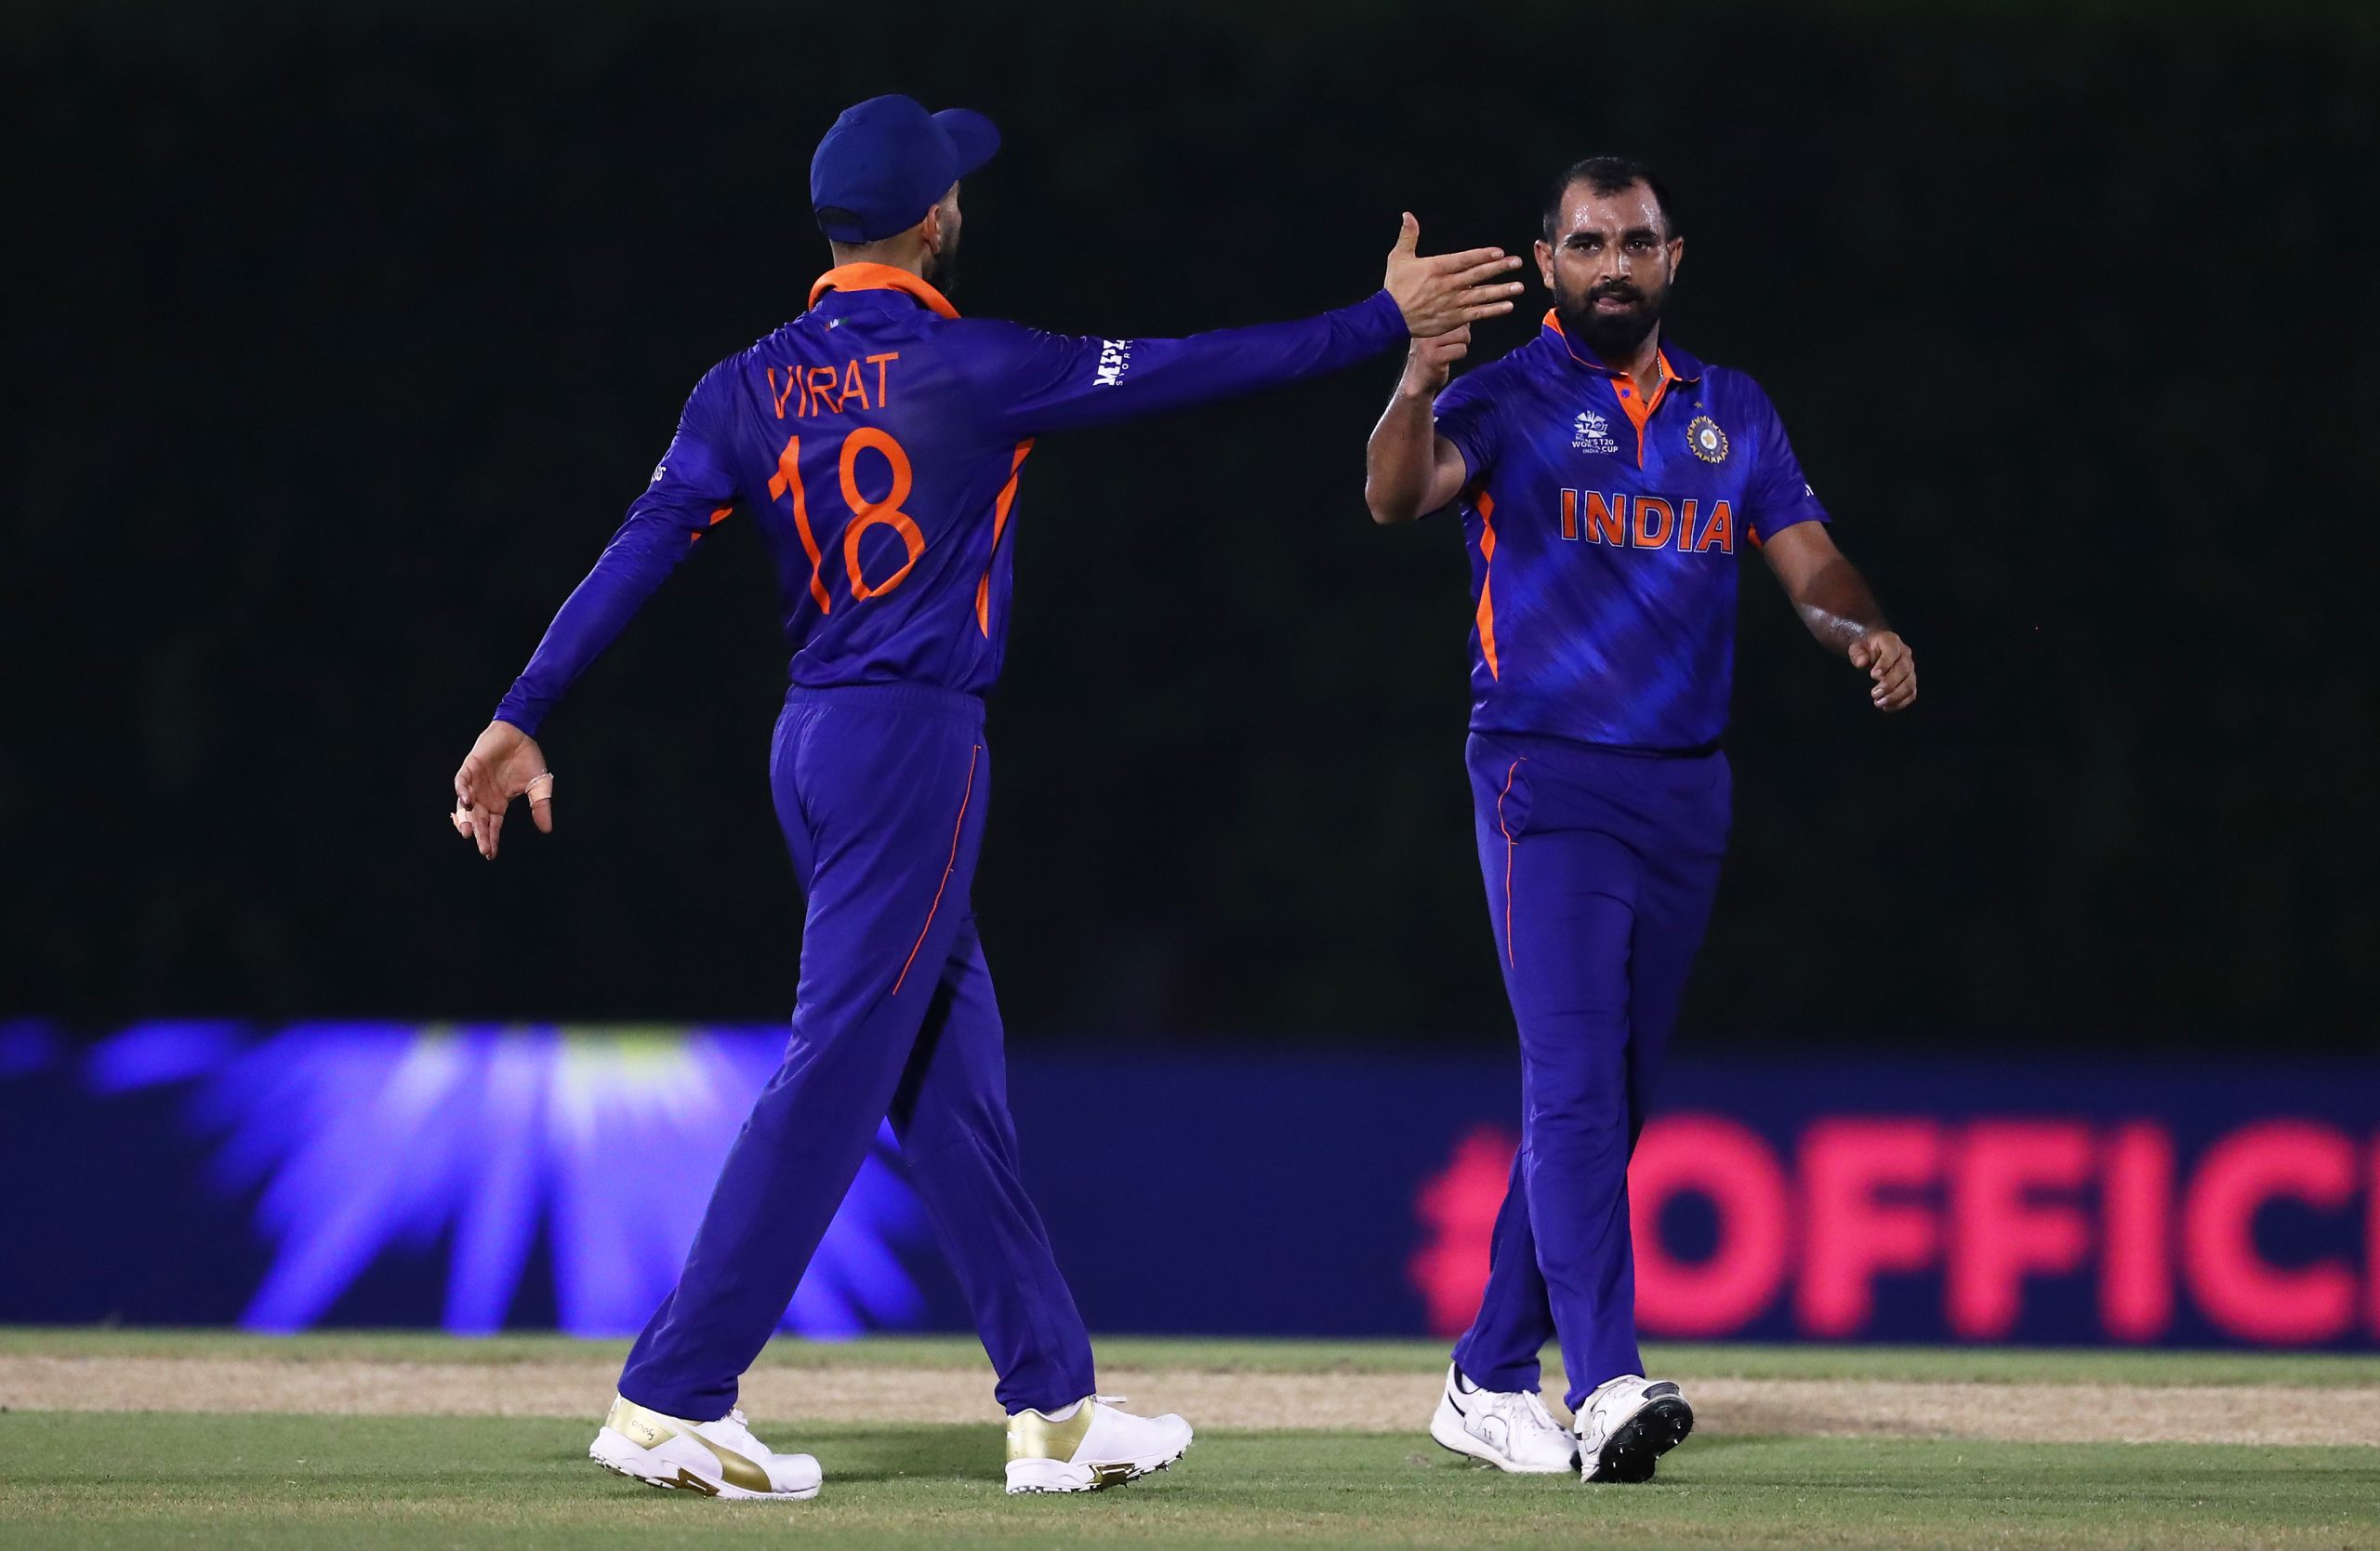 “Attacking Someone Over Their Religion Is The Most Pathetic Thing” – Virat Kohli Breaks Silence On Mohammad Shami Row